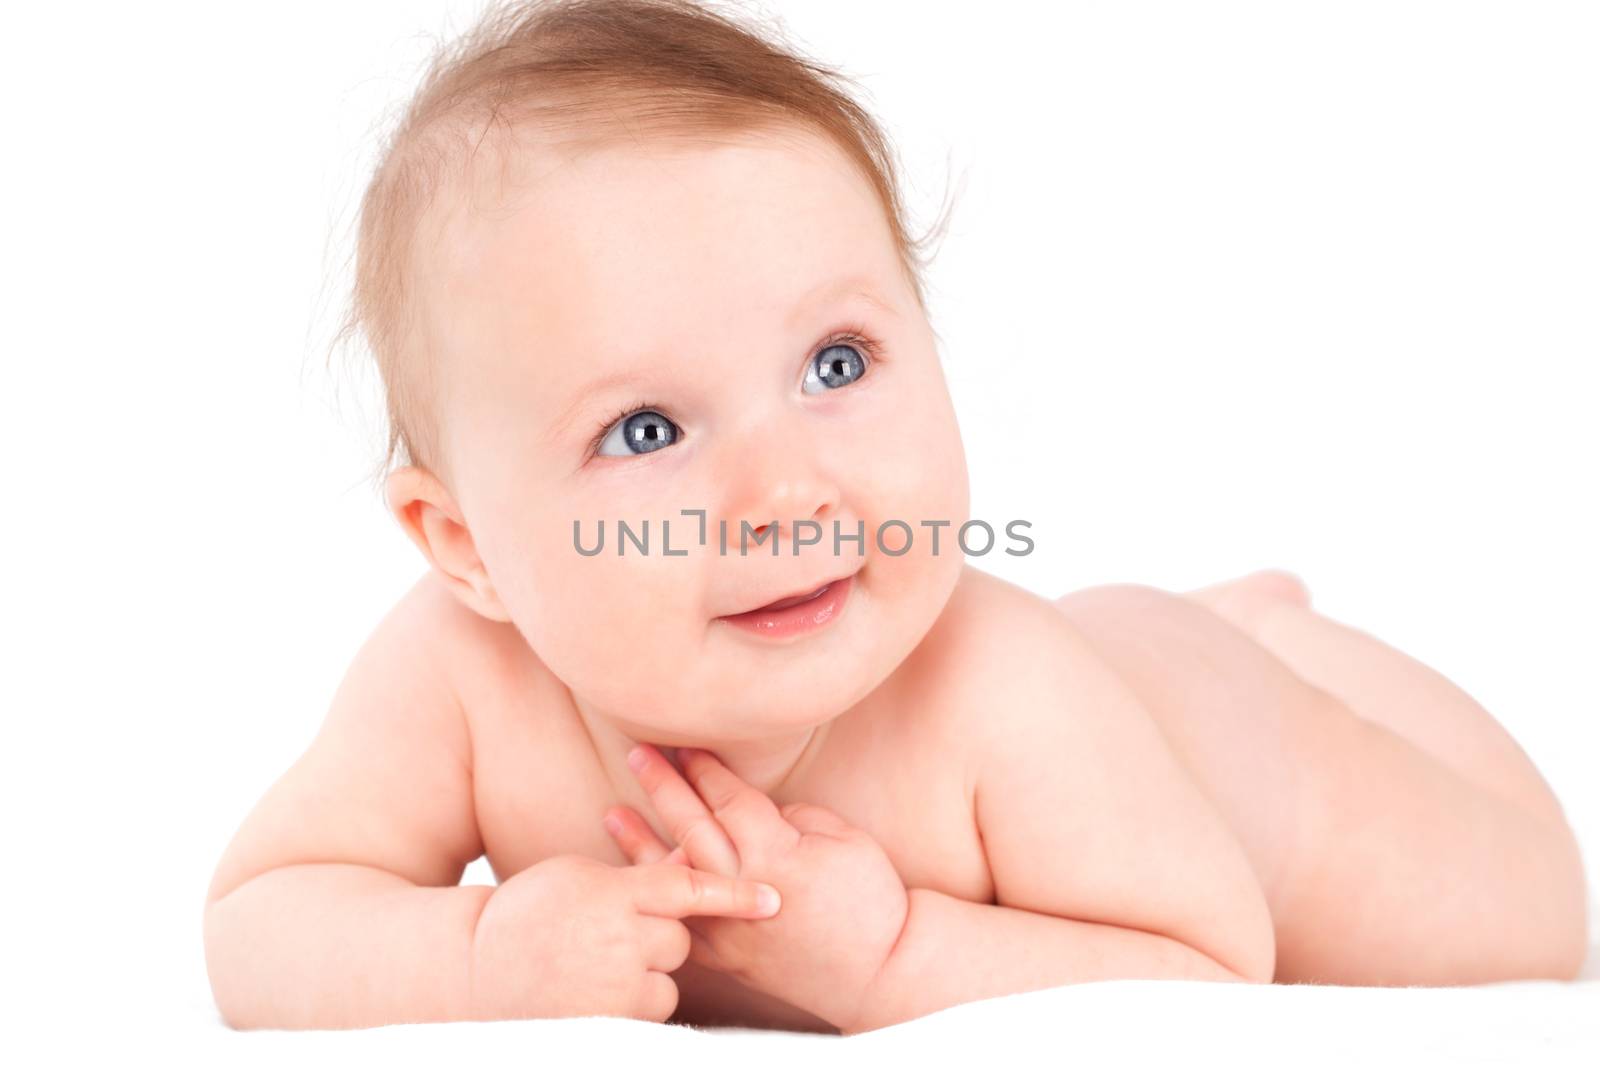 Cute naked caucasian baby lying isolated on white background. 